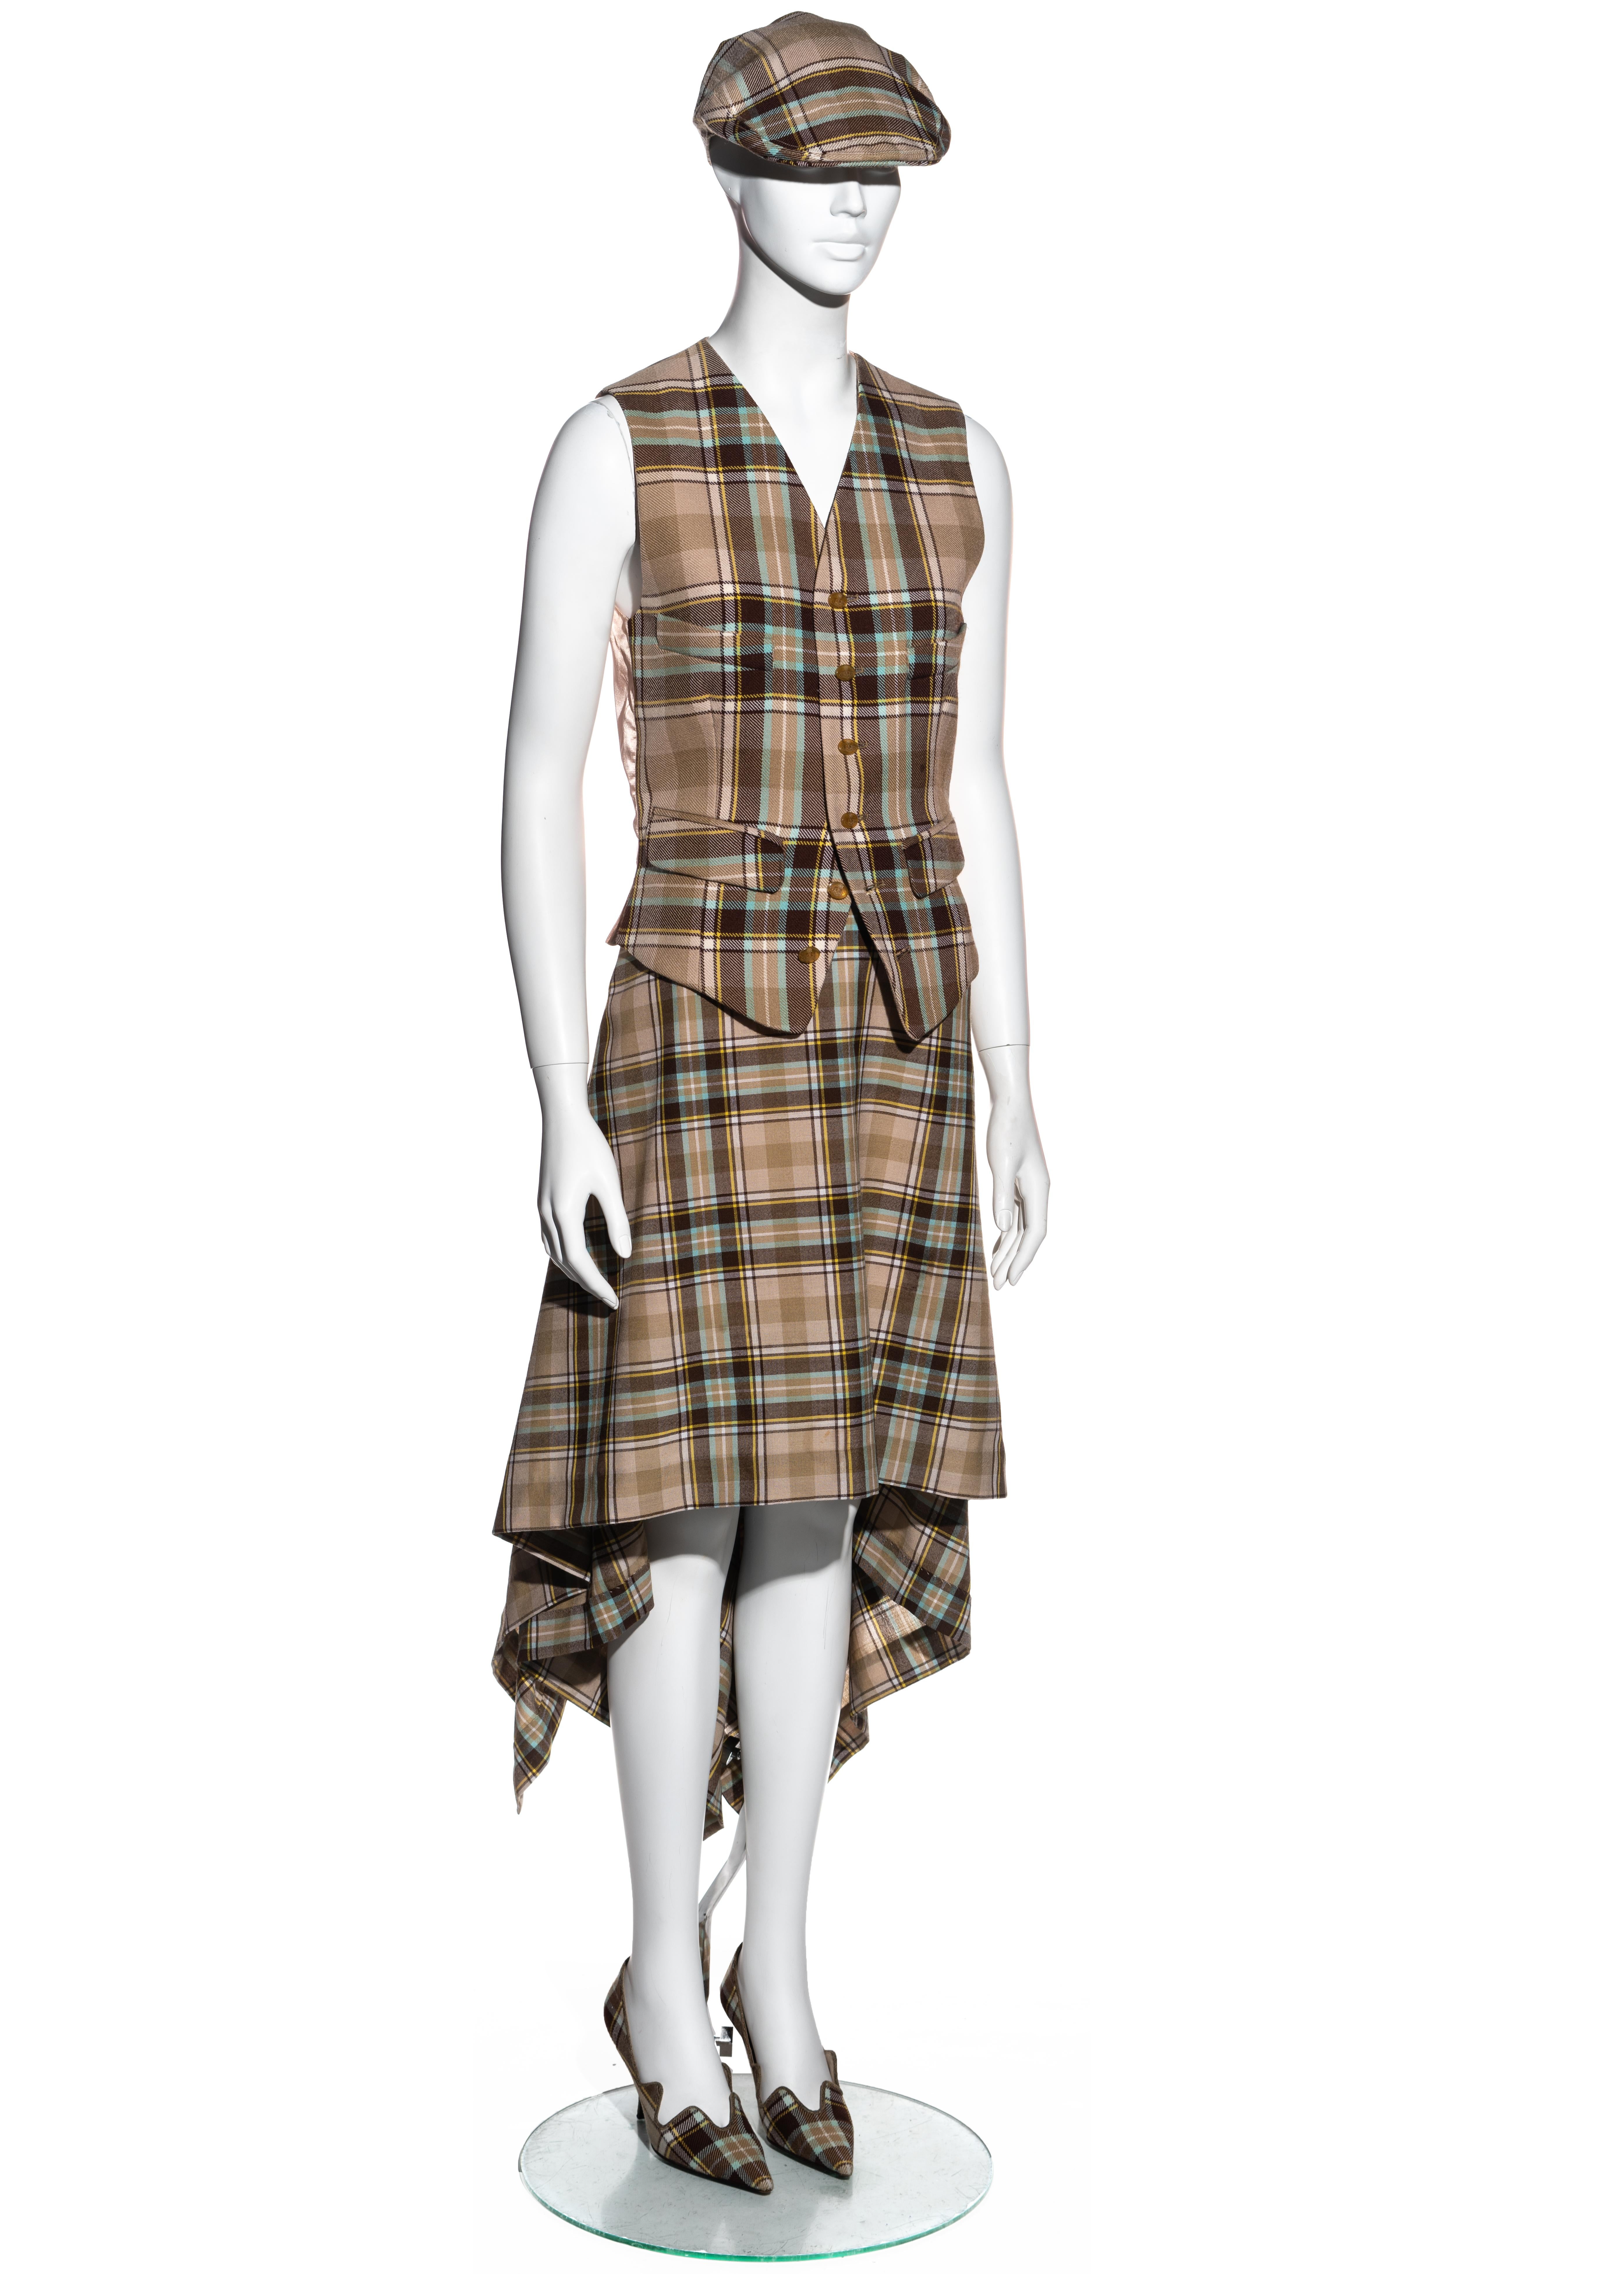 ▪ Vivienne Westwood beige tartan wool four piece ensemble 
▪ Beige, brown, yellow, white and blue tartan wool 
▪ Waistcoat with orb engraved buttons and pin satin back panel 
▪ Mid-length wrap skirt with descending hemline 
▪ Flat-cap with